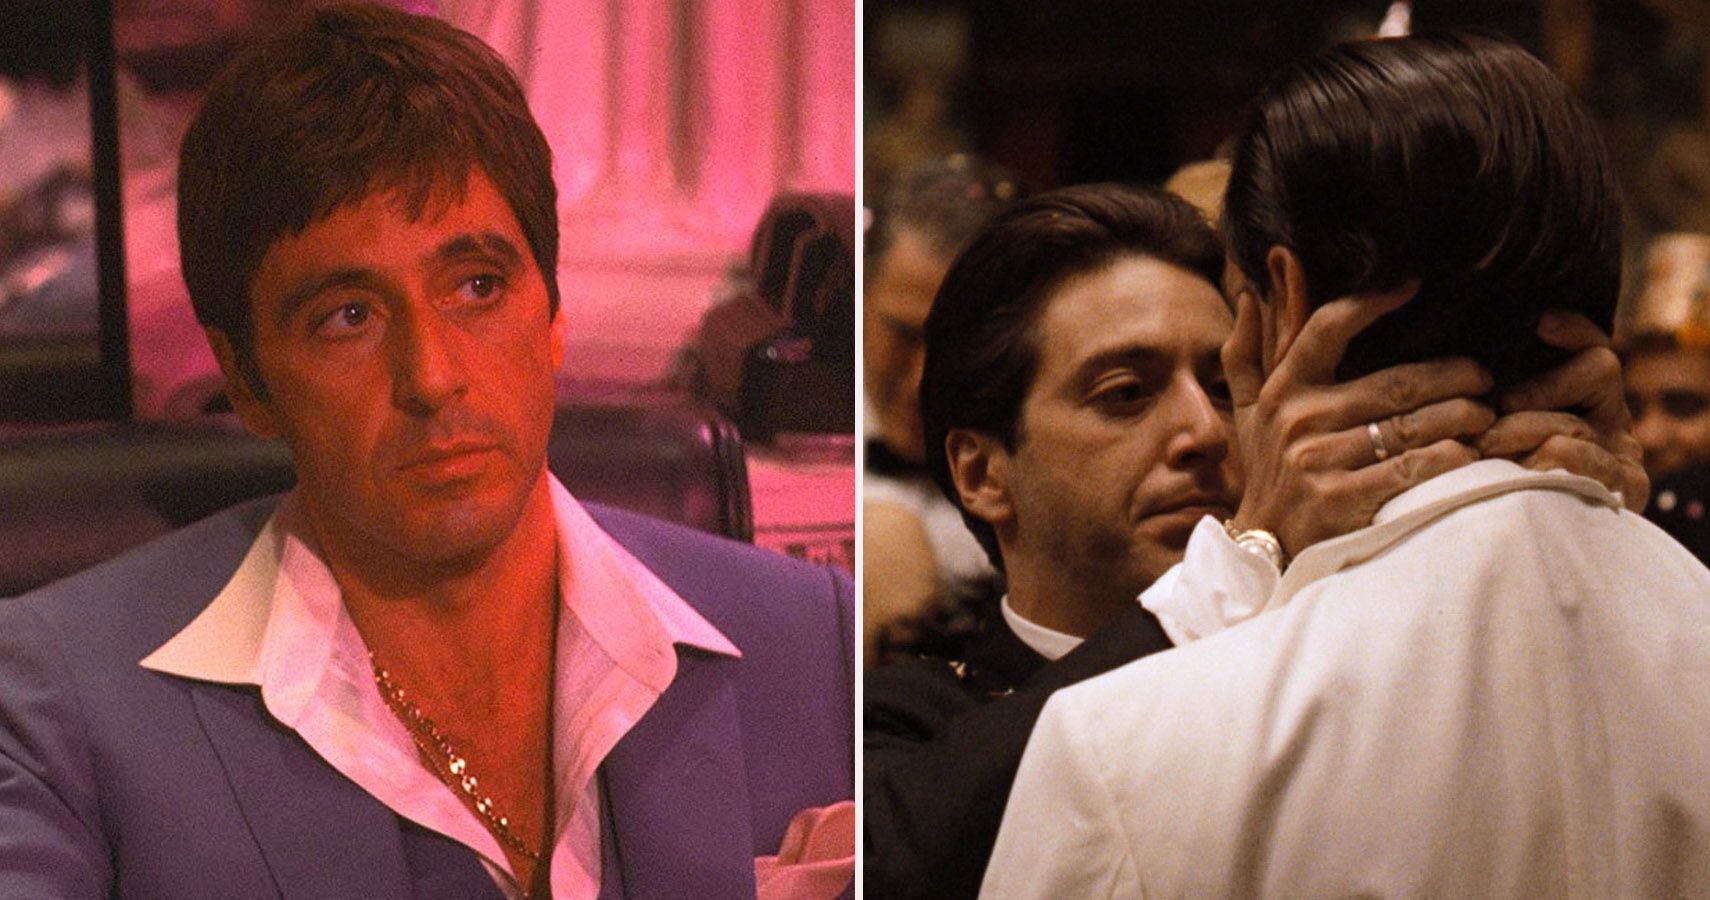 5 Reasons Why Scarface Is Al Pacinos Best Performance (And 5 Why Its Godfather)